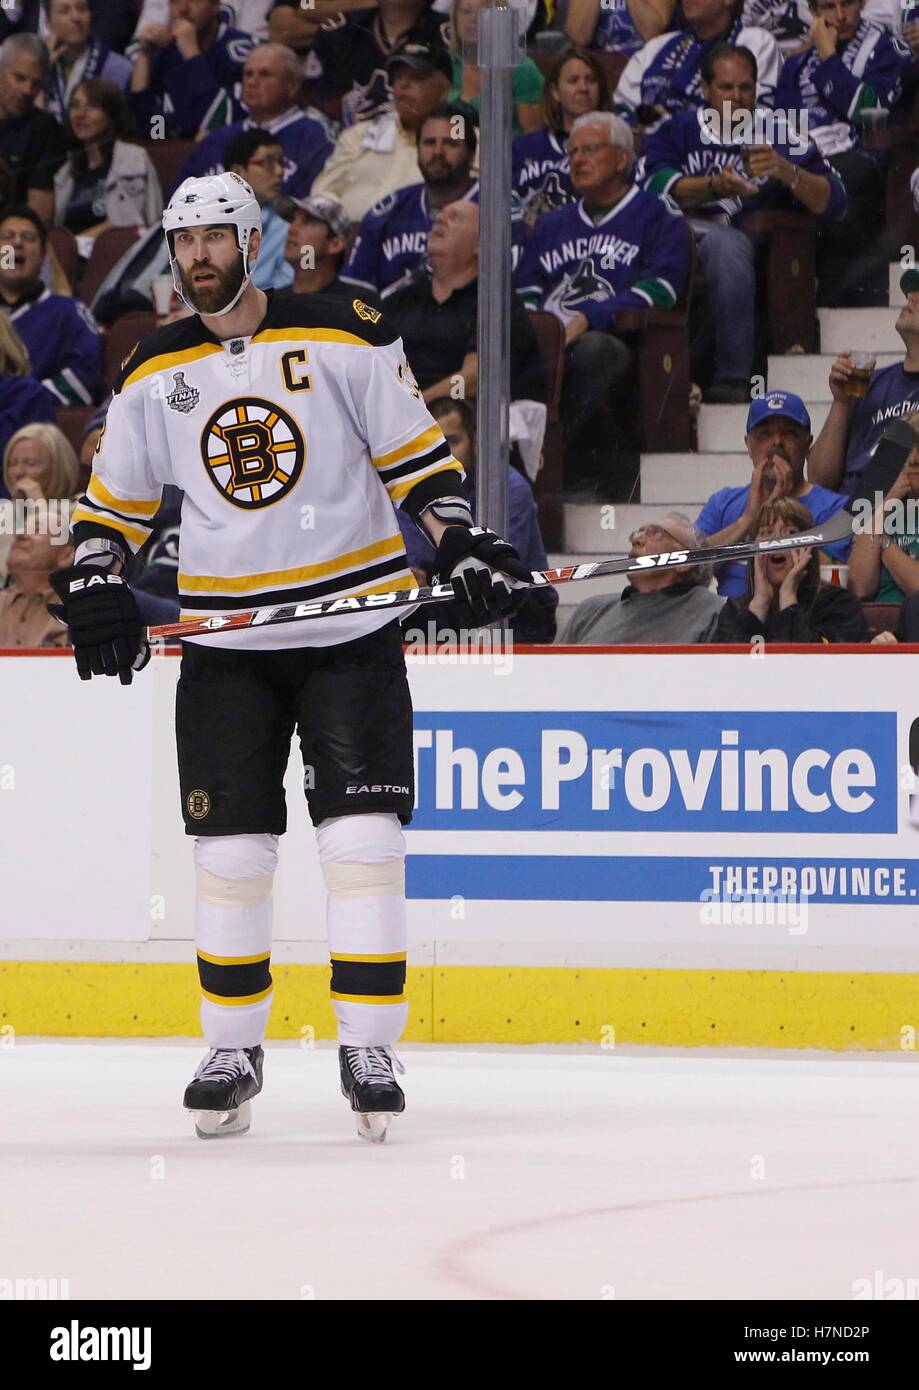 June 4, 2011; Vancouver, BC, CANADA; Boston Bruins defenseman Zdeno Chara during game two of the 2011 Stanley Cup Finals against the Vancouver Canucks at Rogers Arena. The Canucks won 3-2 in overtime. Stock Photo